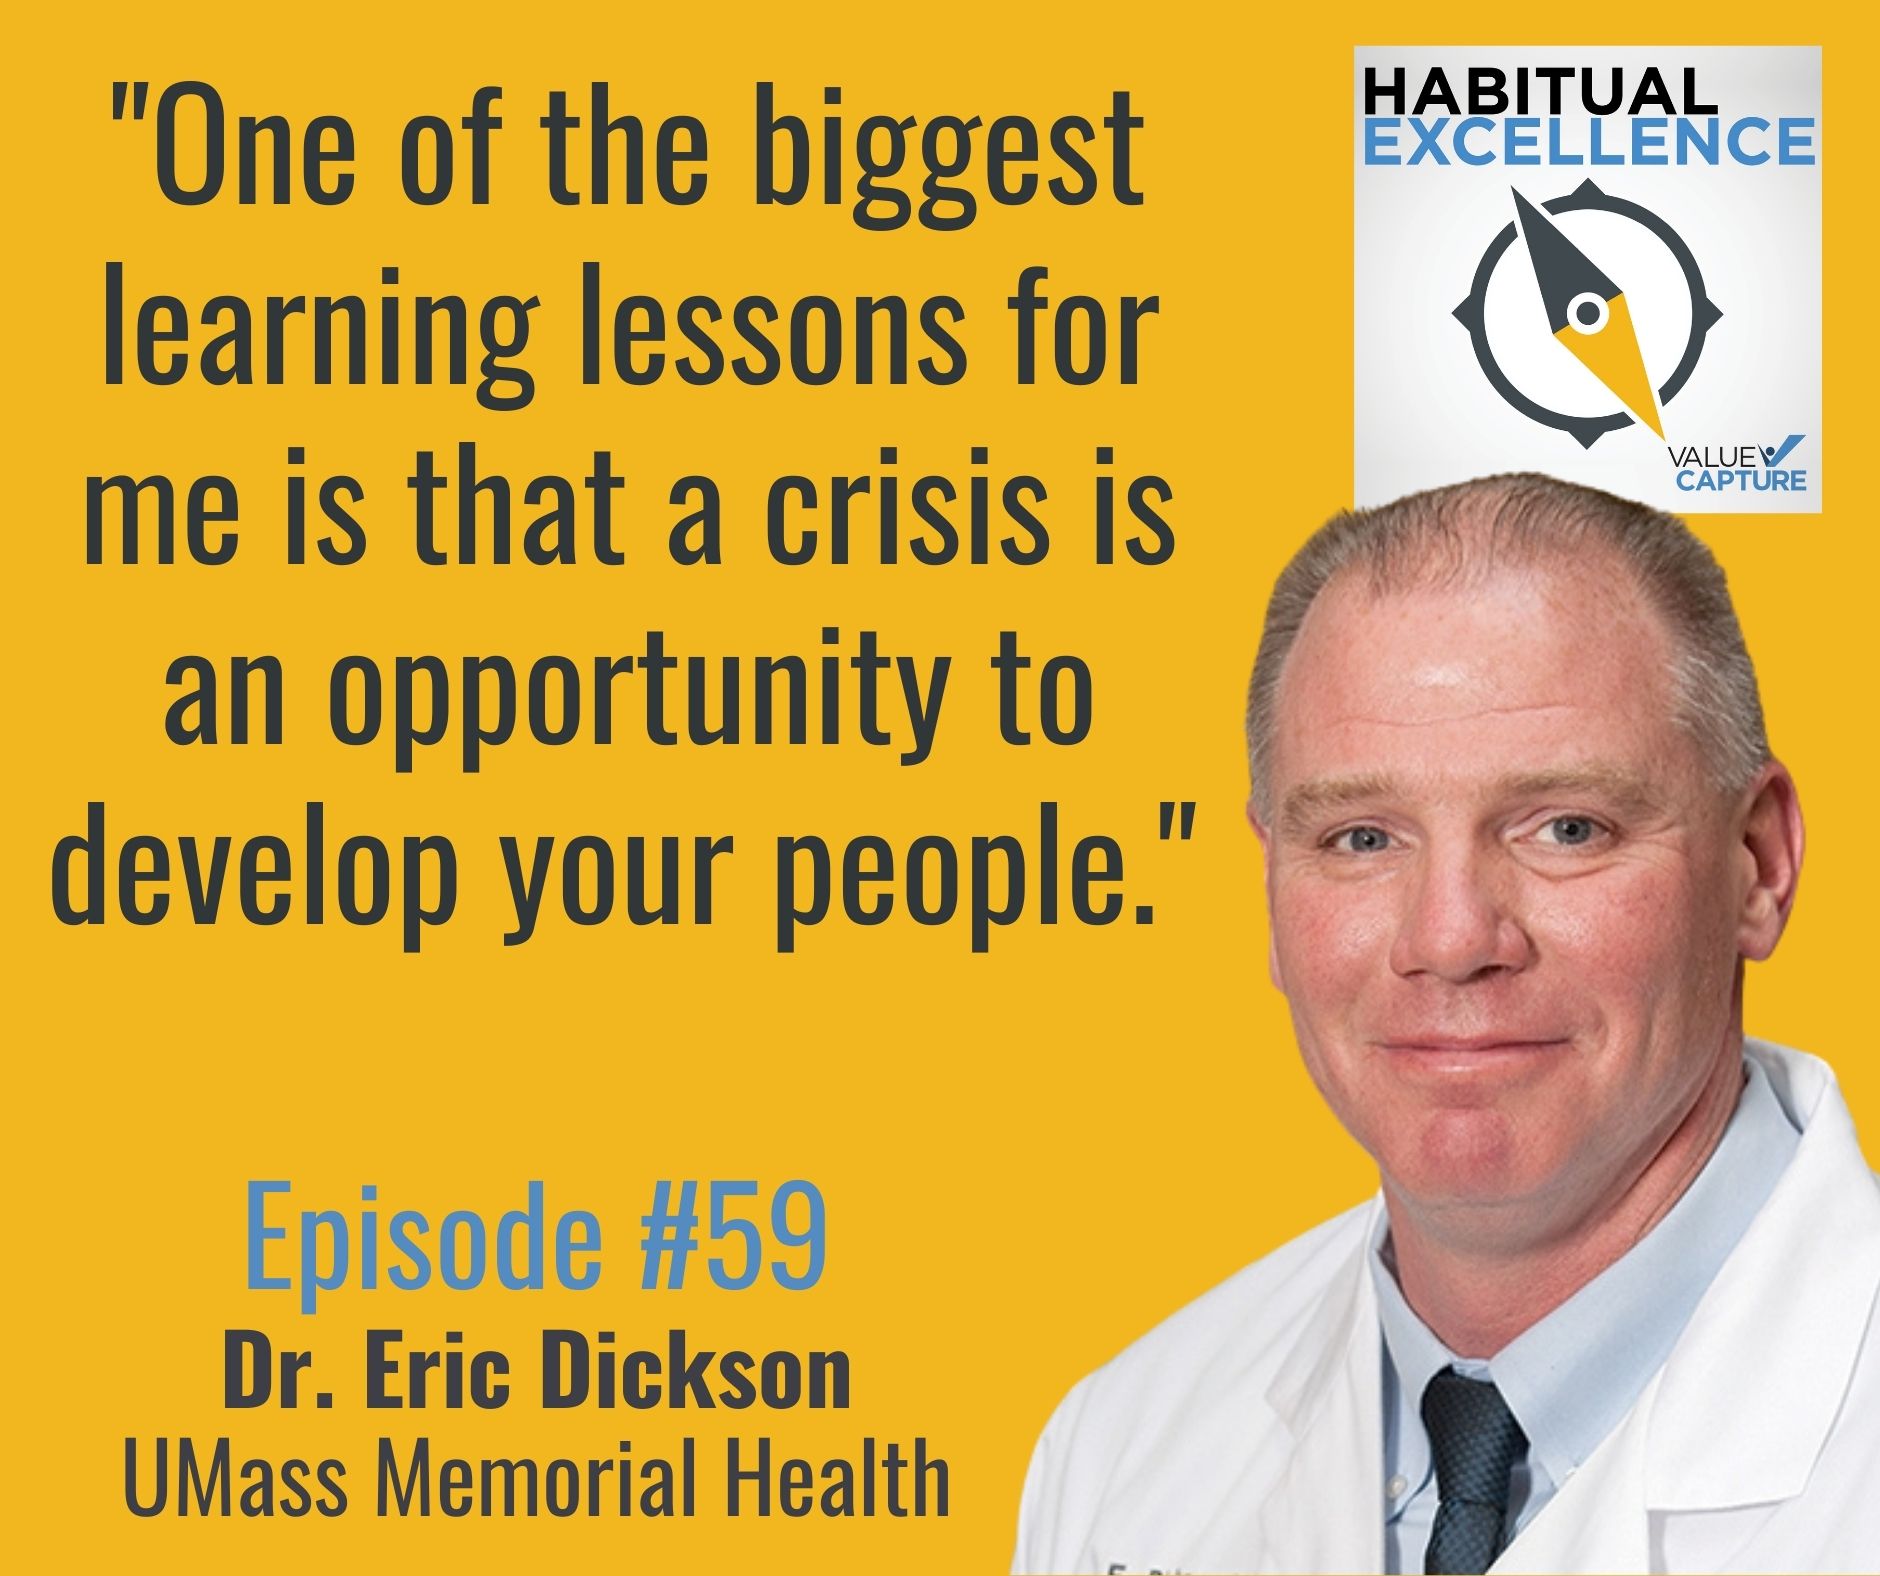 "One of the biggest learning lessons for me is that a crisis is an opportunity to develop your people." 